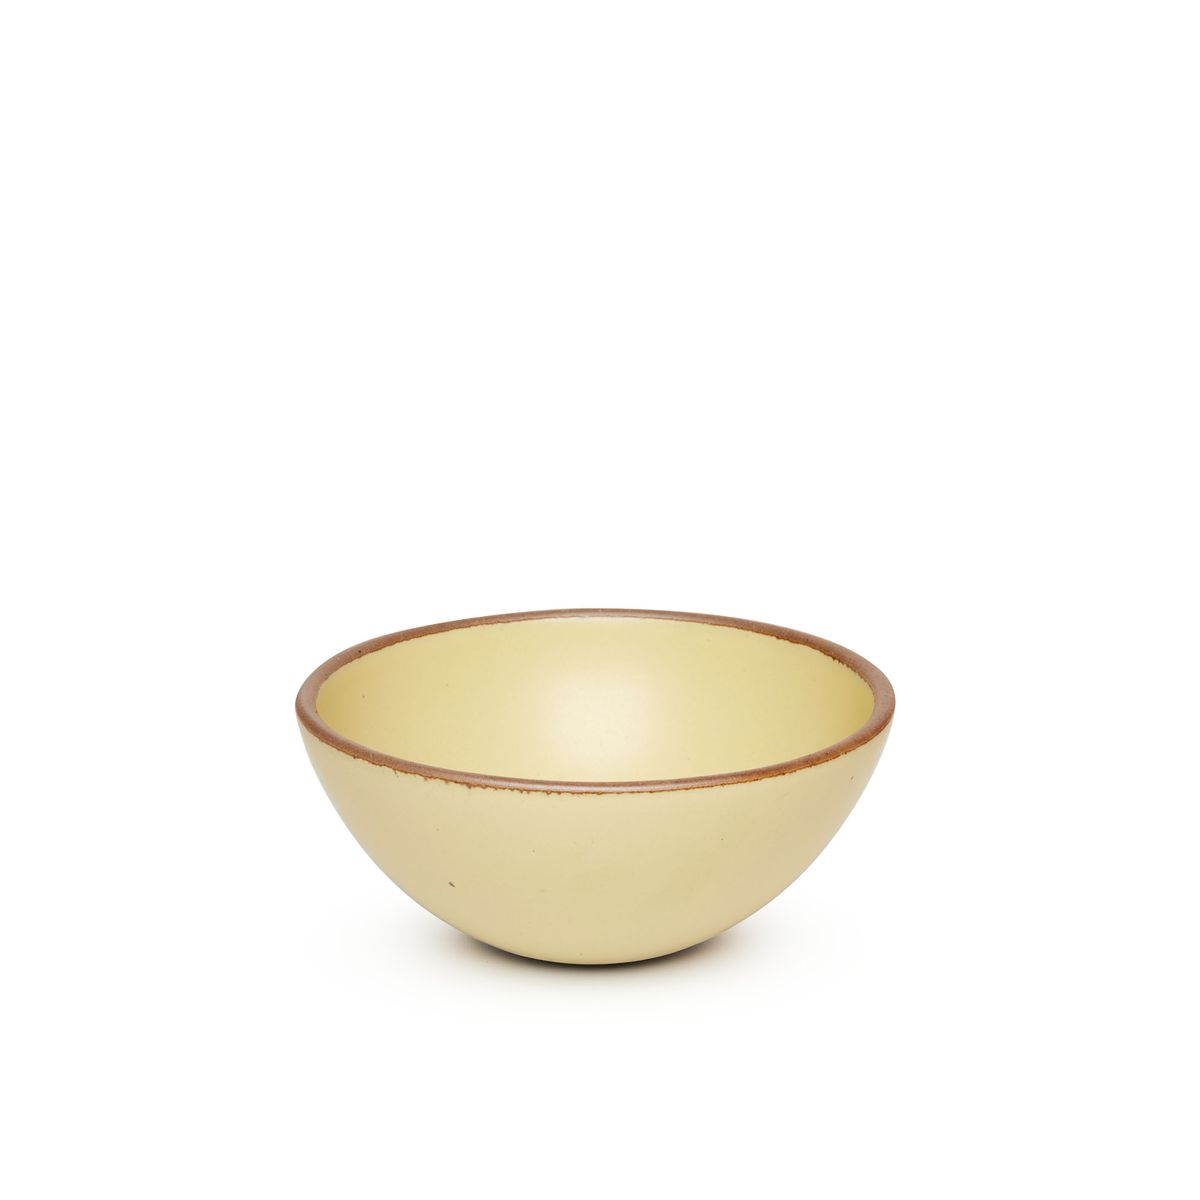 A medium rounded ceramic bowl in a light butter yellow color featuring iron speckles and an unglazed rim